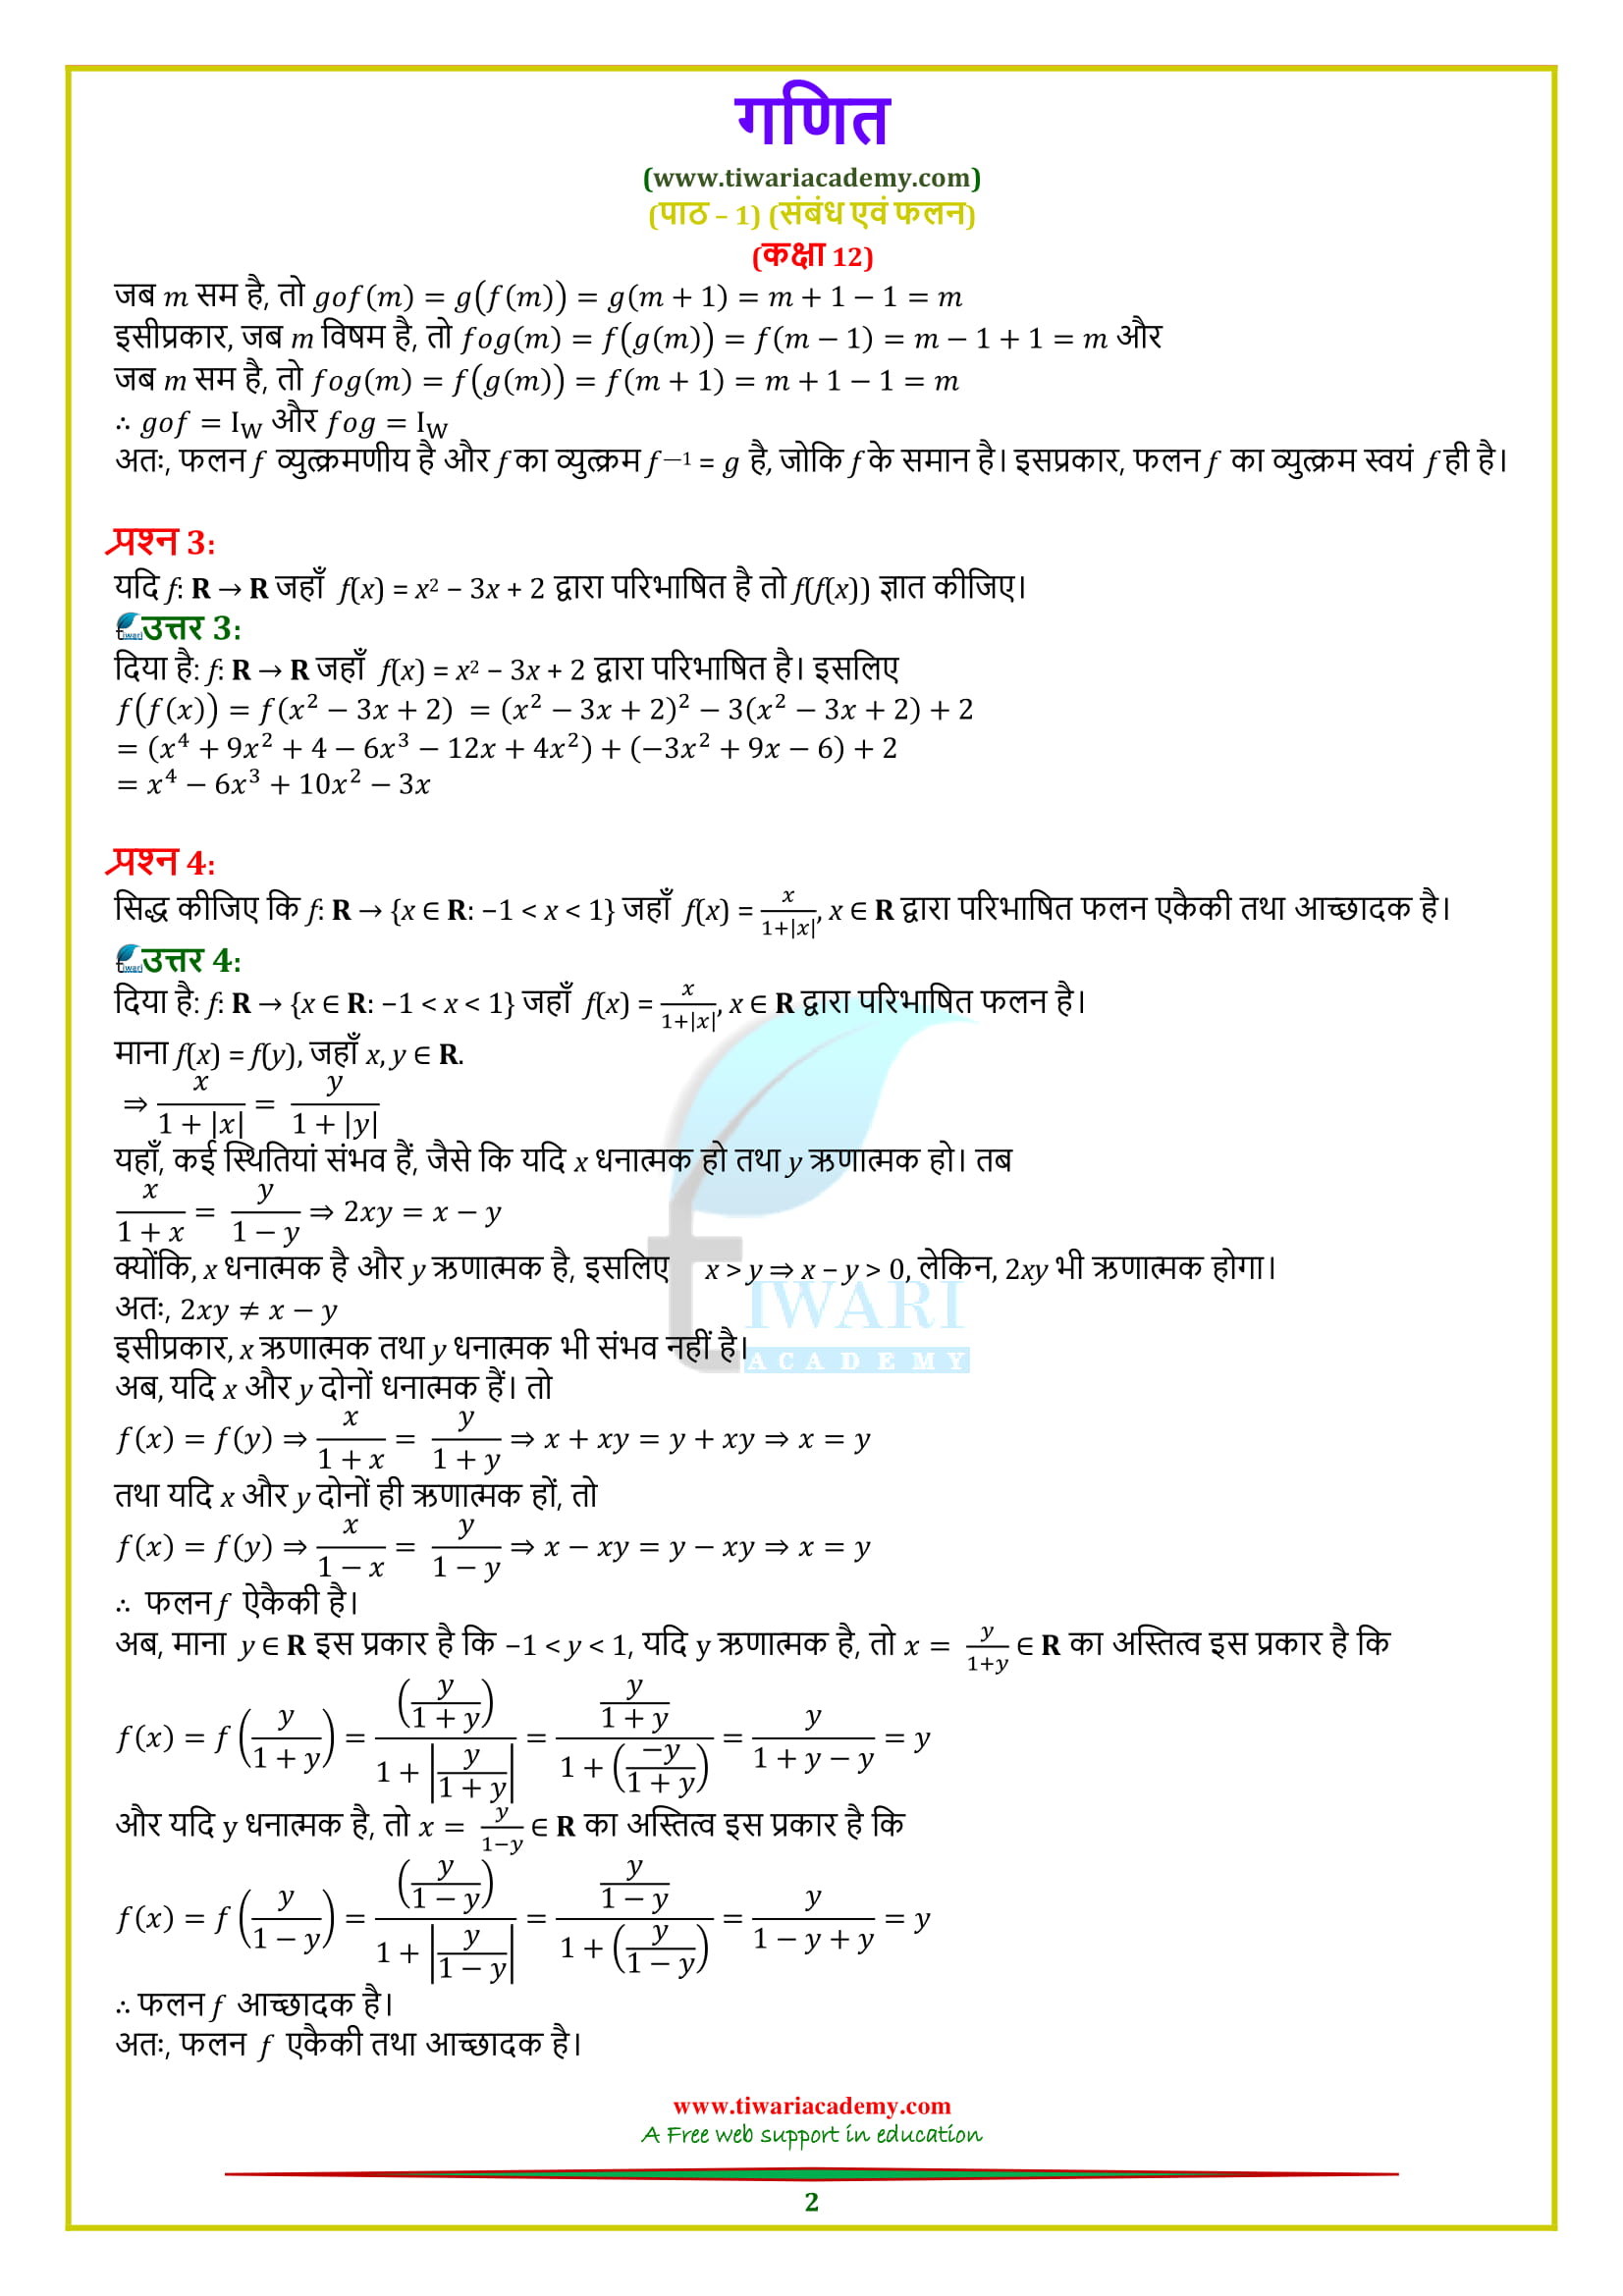 NCERT Solutions for Class 12 Maths Chapter 1 Miscellaneous Exercise updated for 2018-19